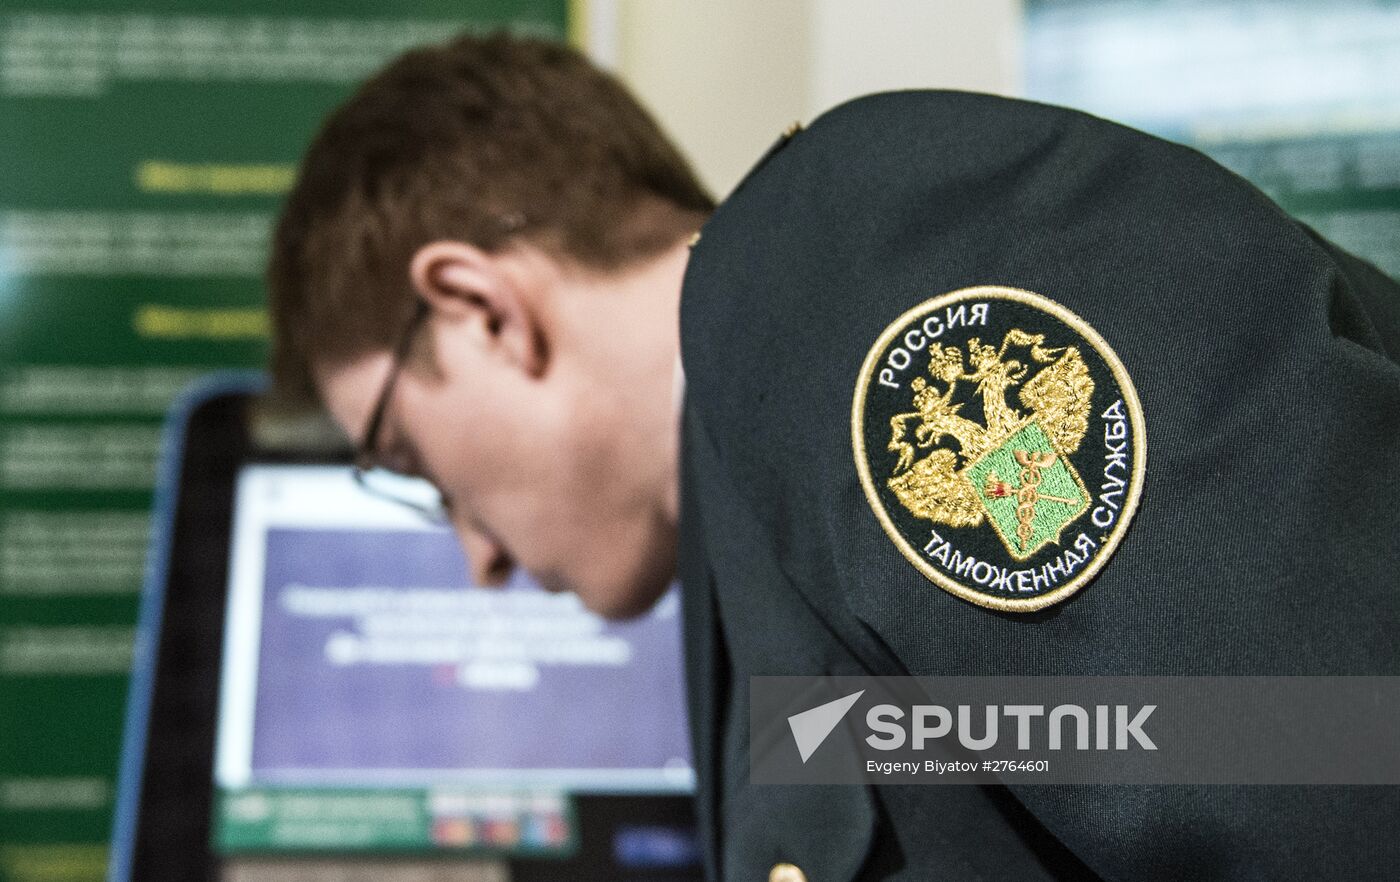 Customs duties payment machine installed at Domodedovo International Airport